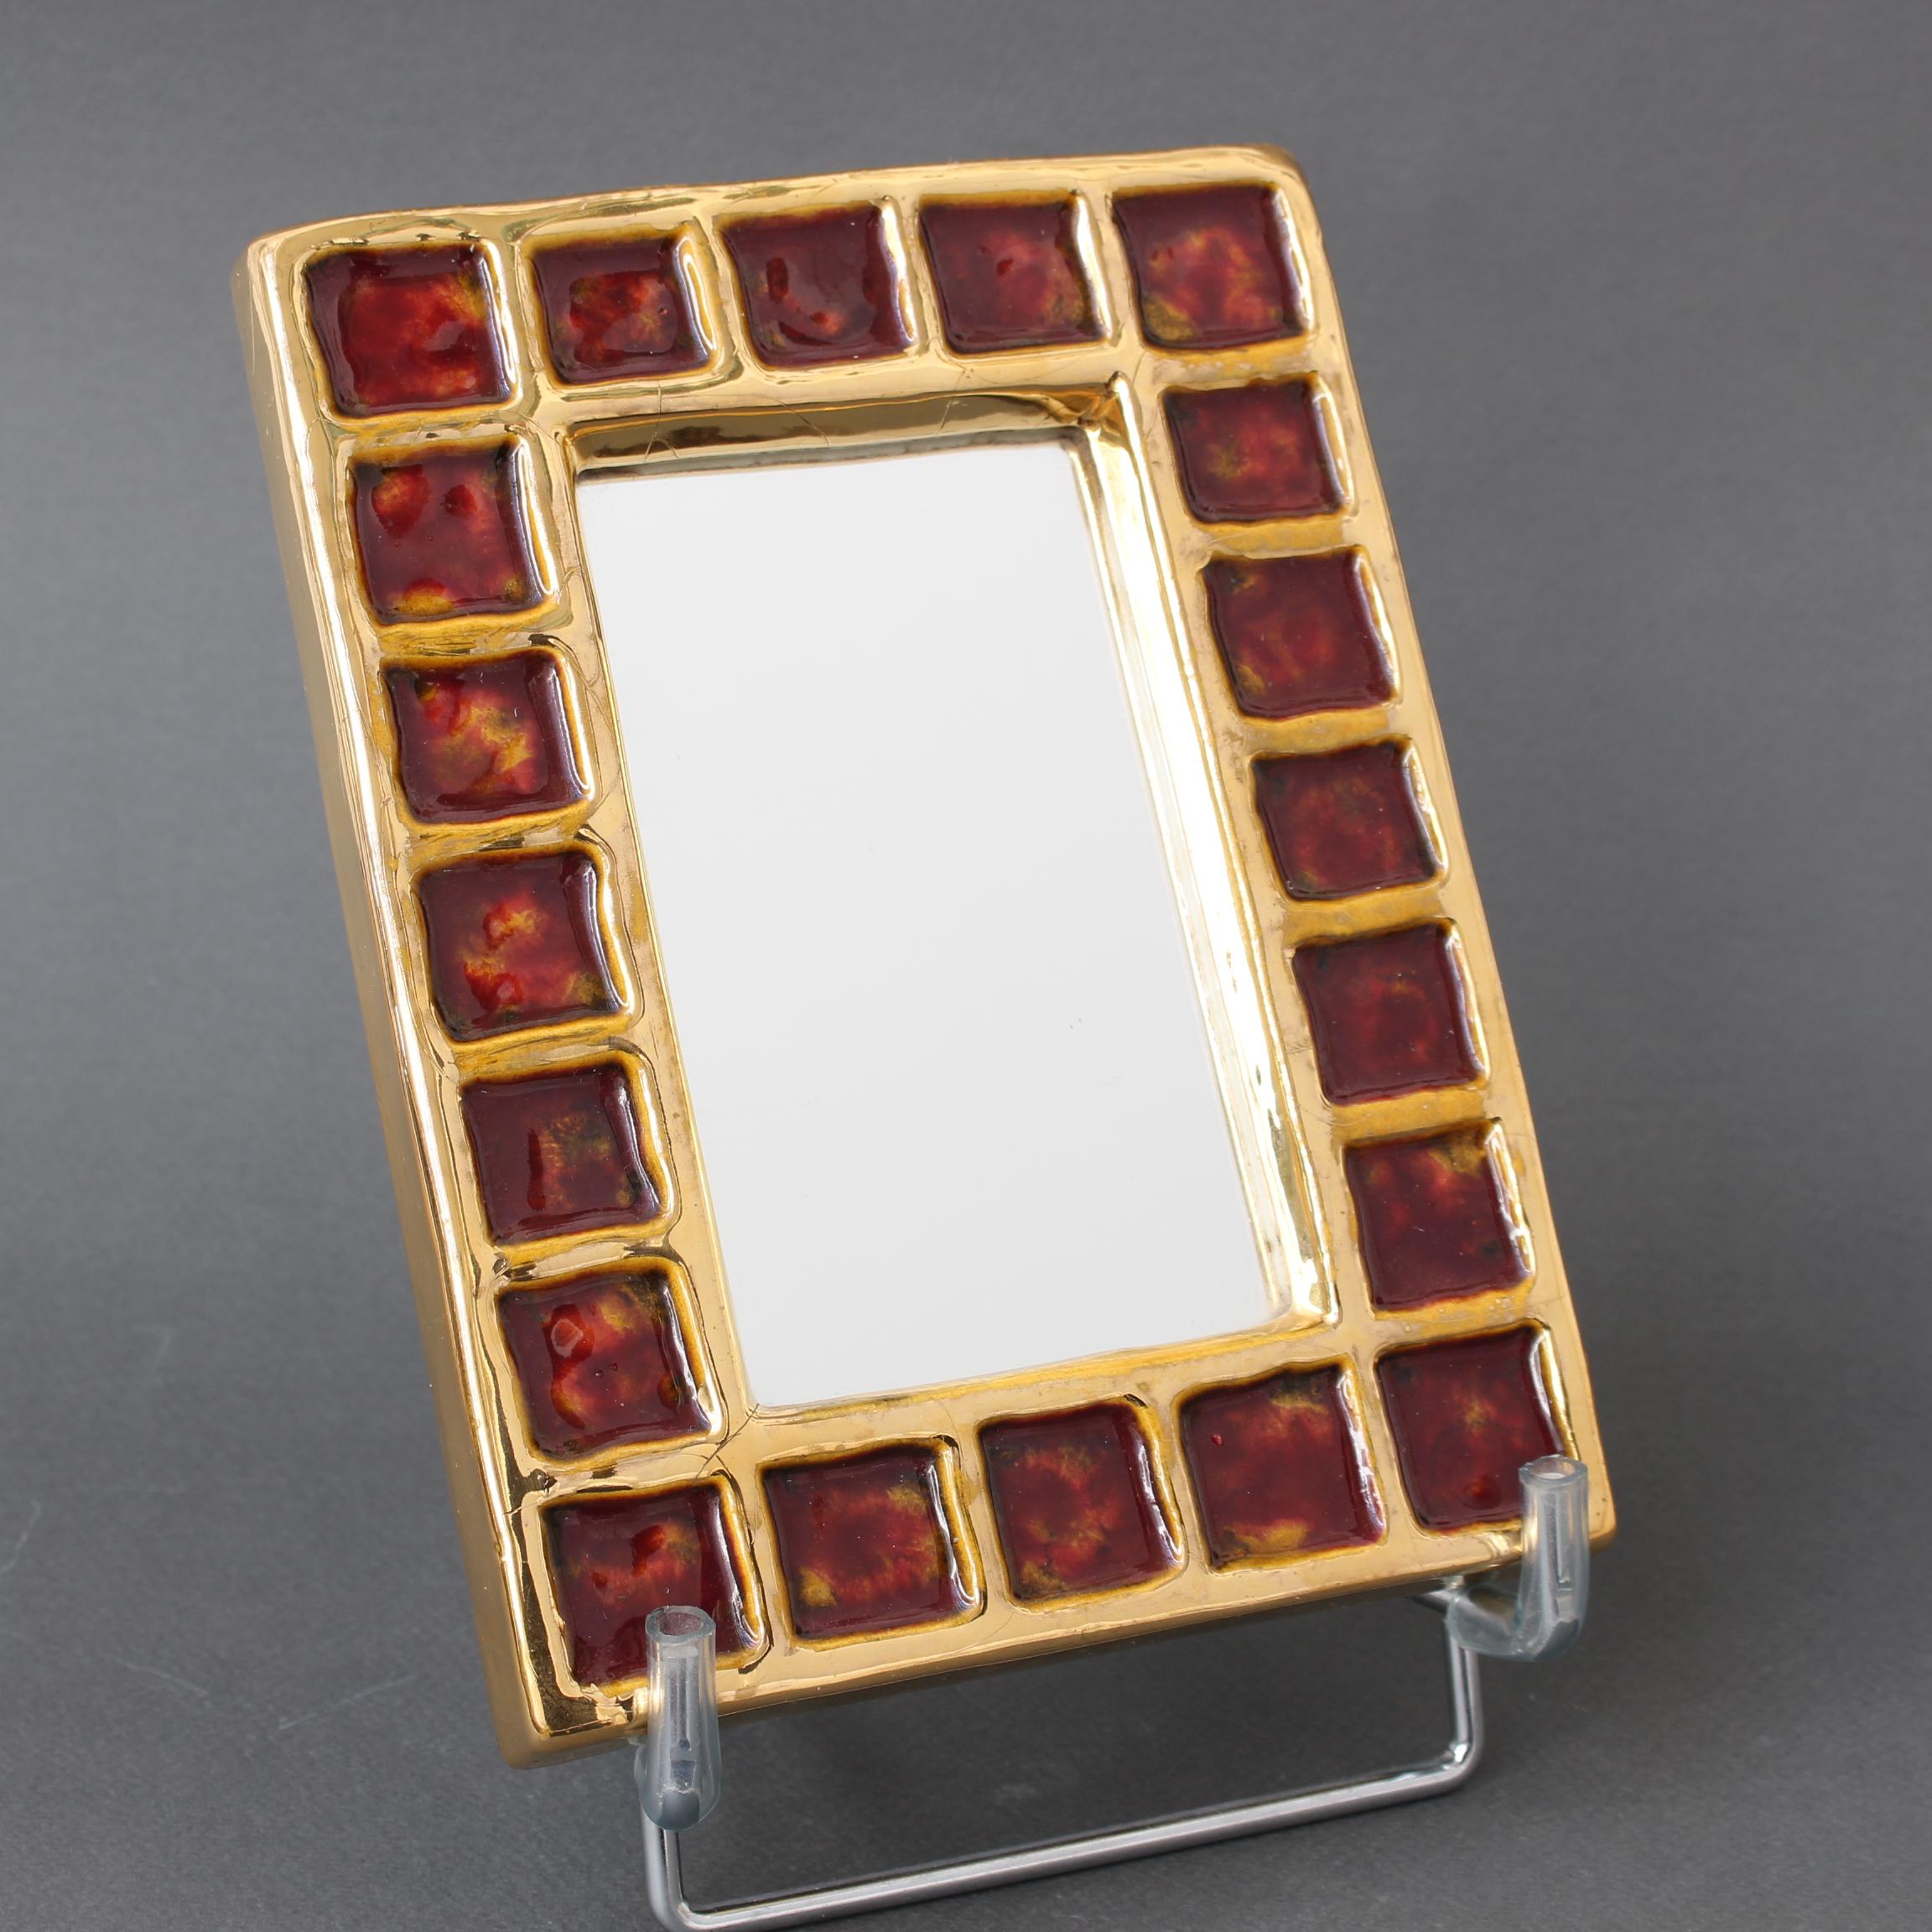 French vintage ceramic wall mirror by François Lembo (circa 1970s). A whimsically decorated, small rectangular wall mirror with gold coloured inner and outer borders framing a series of reddish-brown enamel squares which seem filled like a luxurious